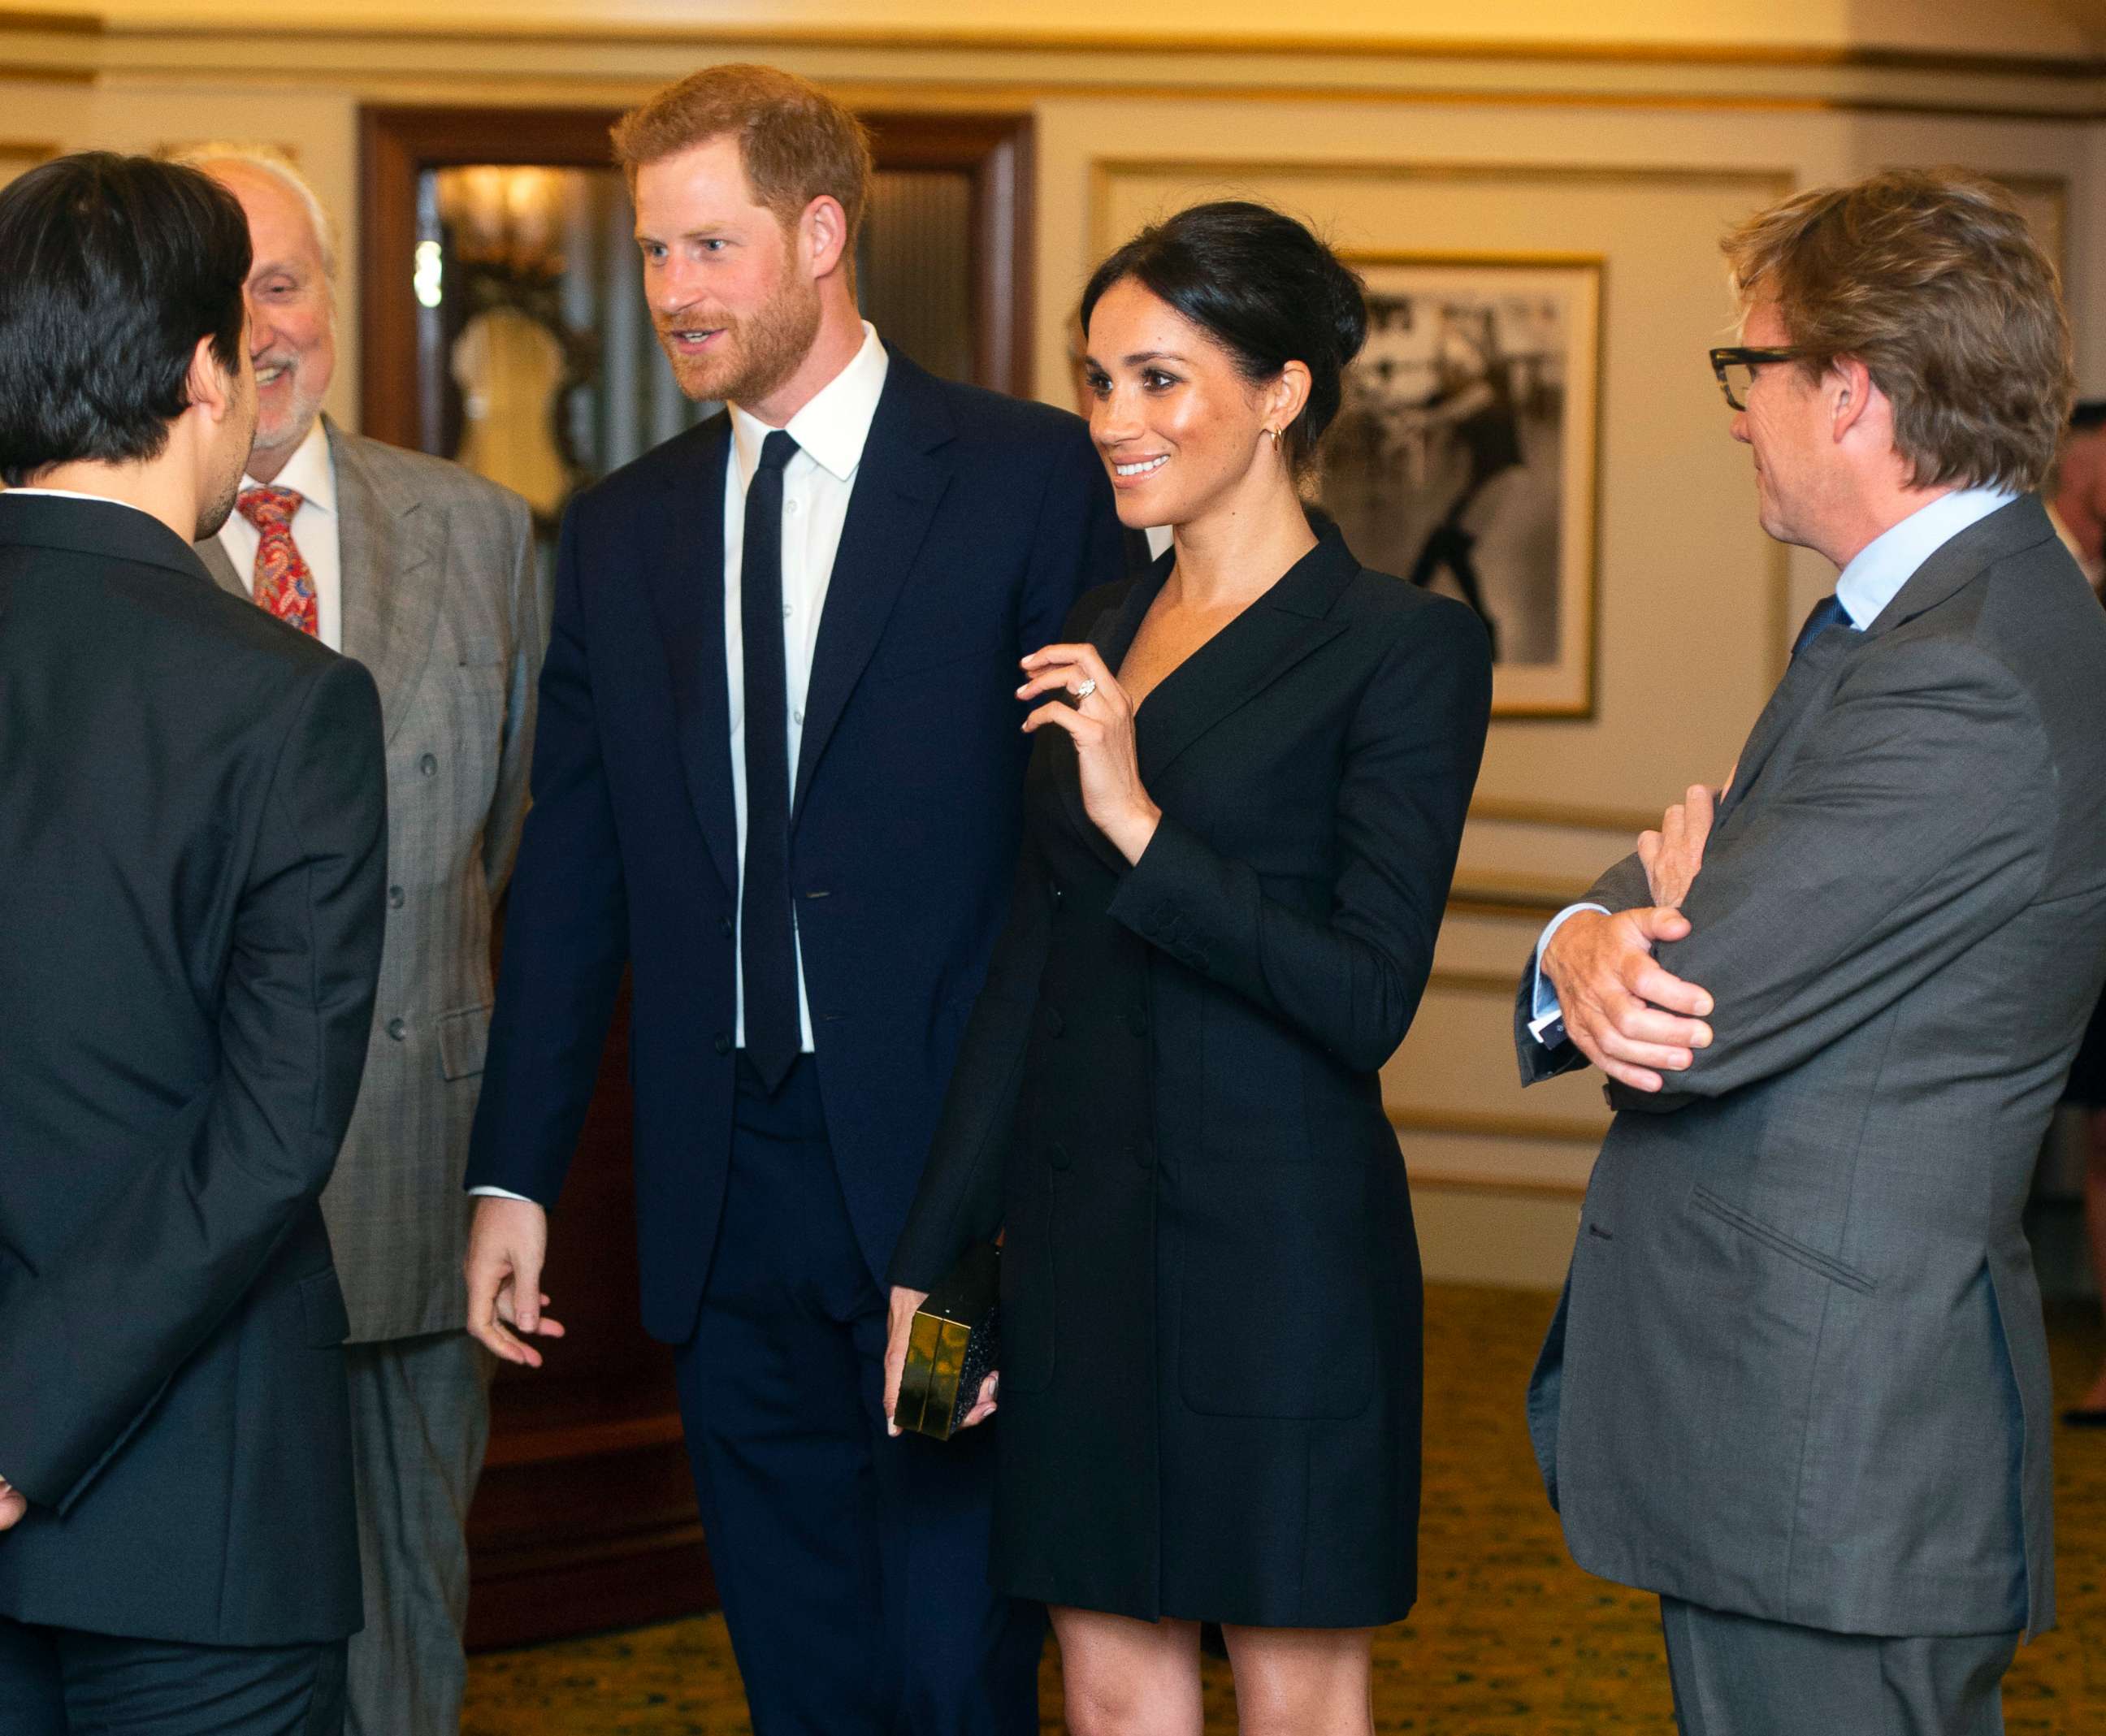 PHOTO: Prince Harry and Meghan Markle, Duchess of Sussex attend a gala performance of the musical Hamilton, Aug. 29 2018.  